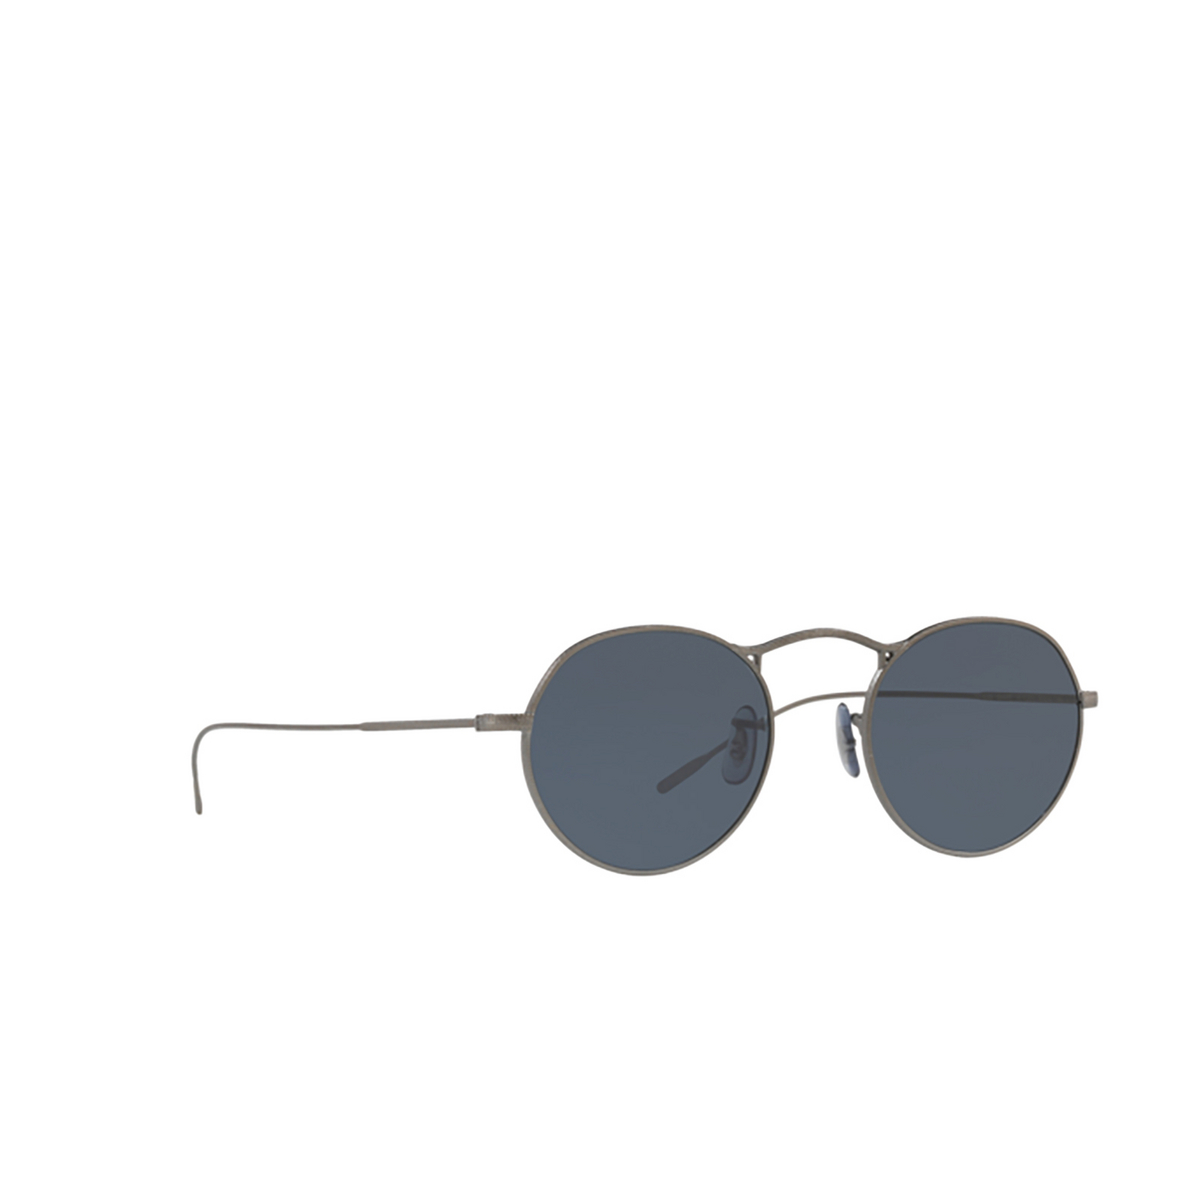 Oliver Peoples M-4 30TH Sunglasses 5244R5 Antique Pewter - three-quarters view